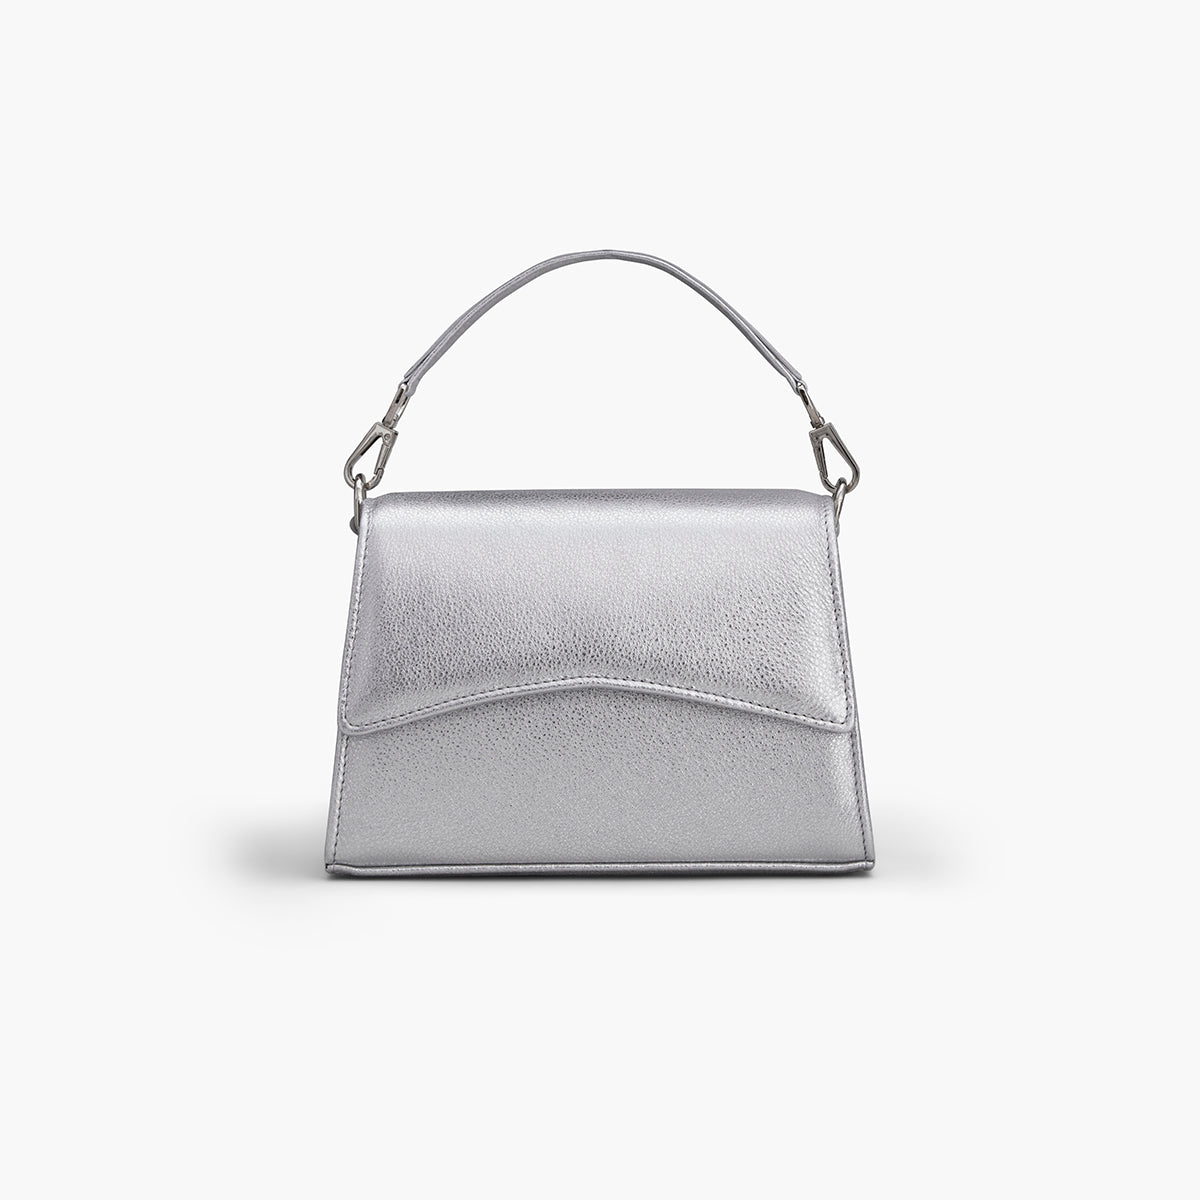 A silver shimmer grained leather handbag with silver metalware and an adjustable strap for a comfortable crossbody or shoulder fit.